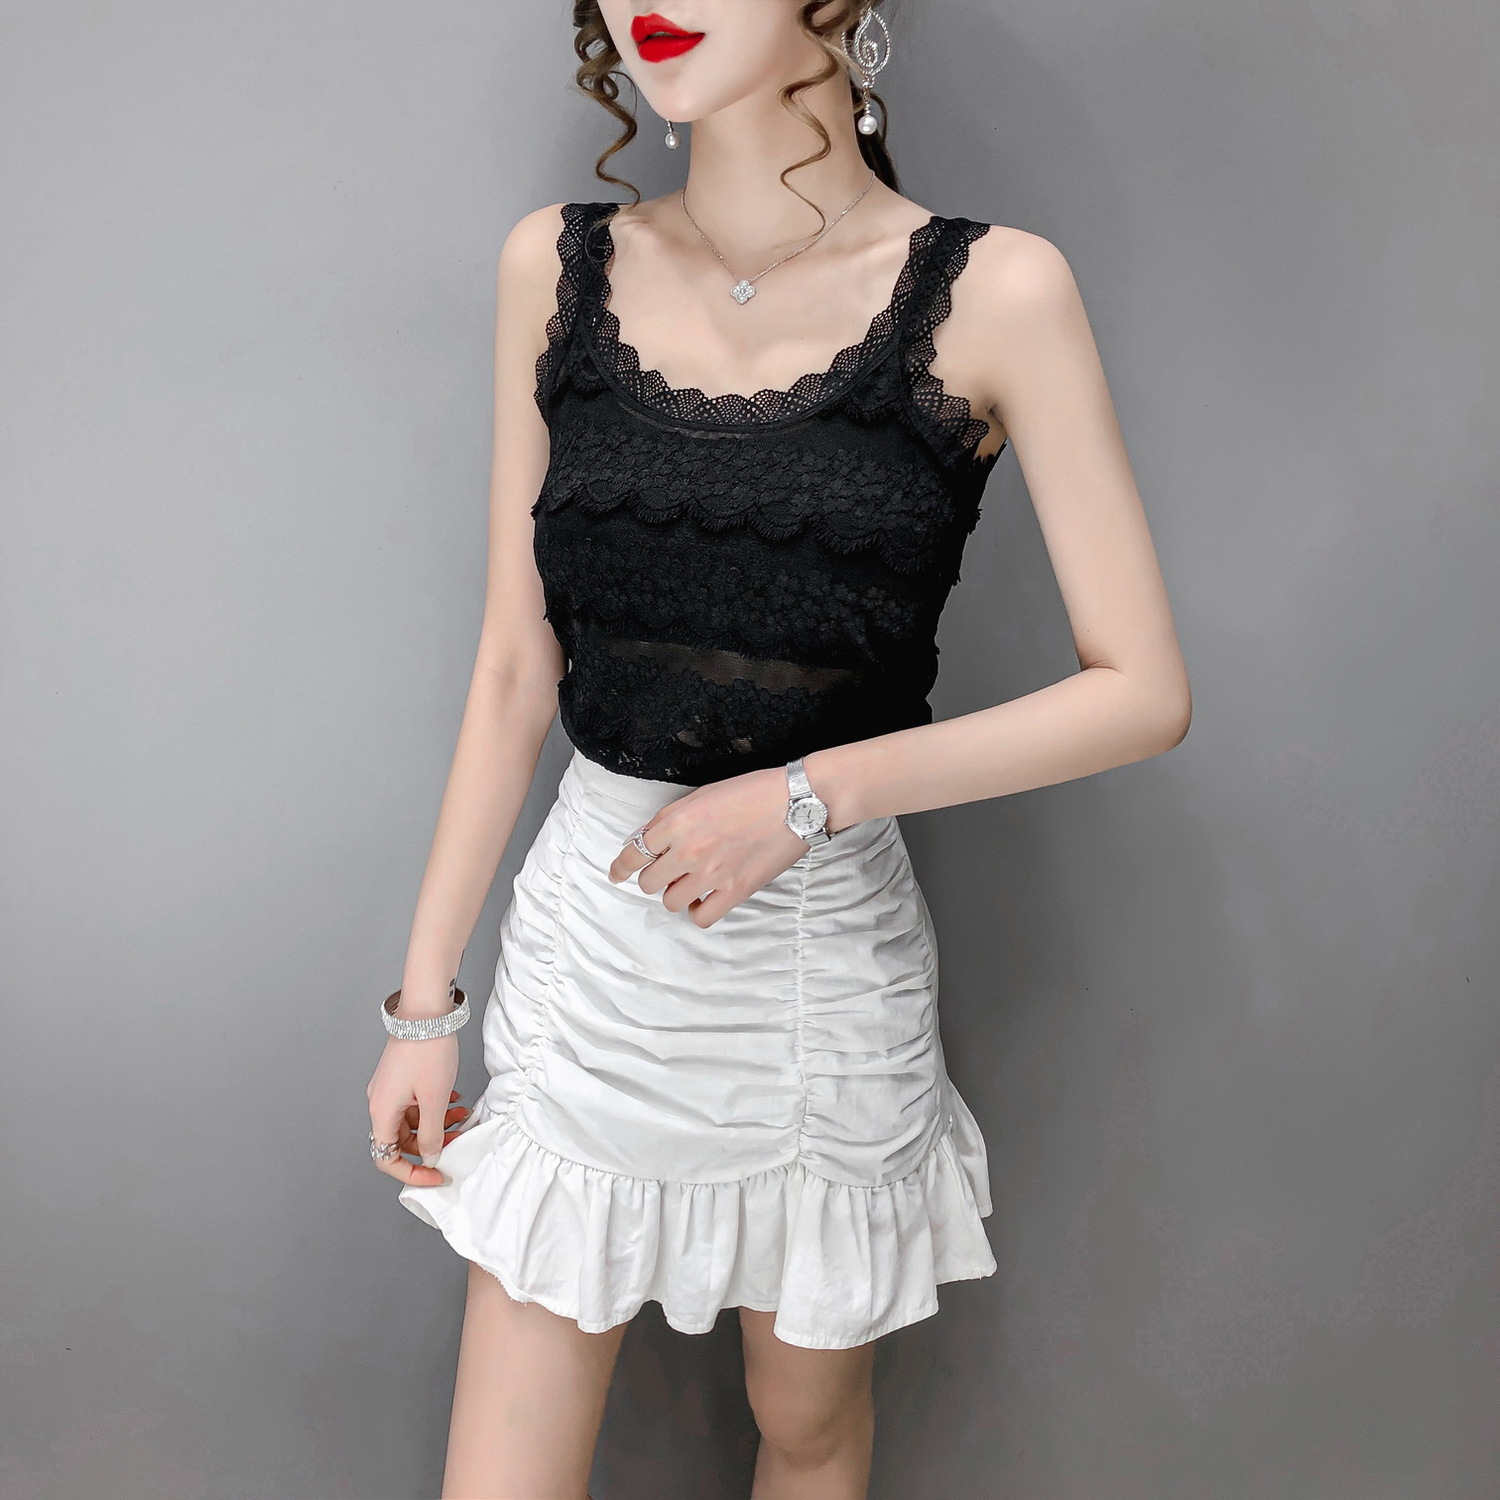 Sling female sexy sleeveless top summer wear lace suit inside all-match self-cultivation bottoming camisole vest female